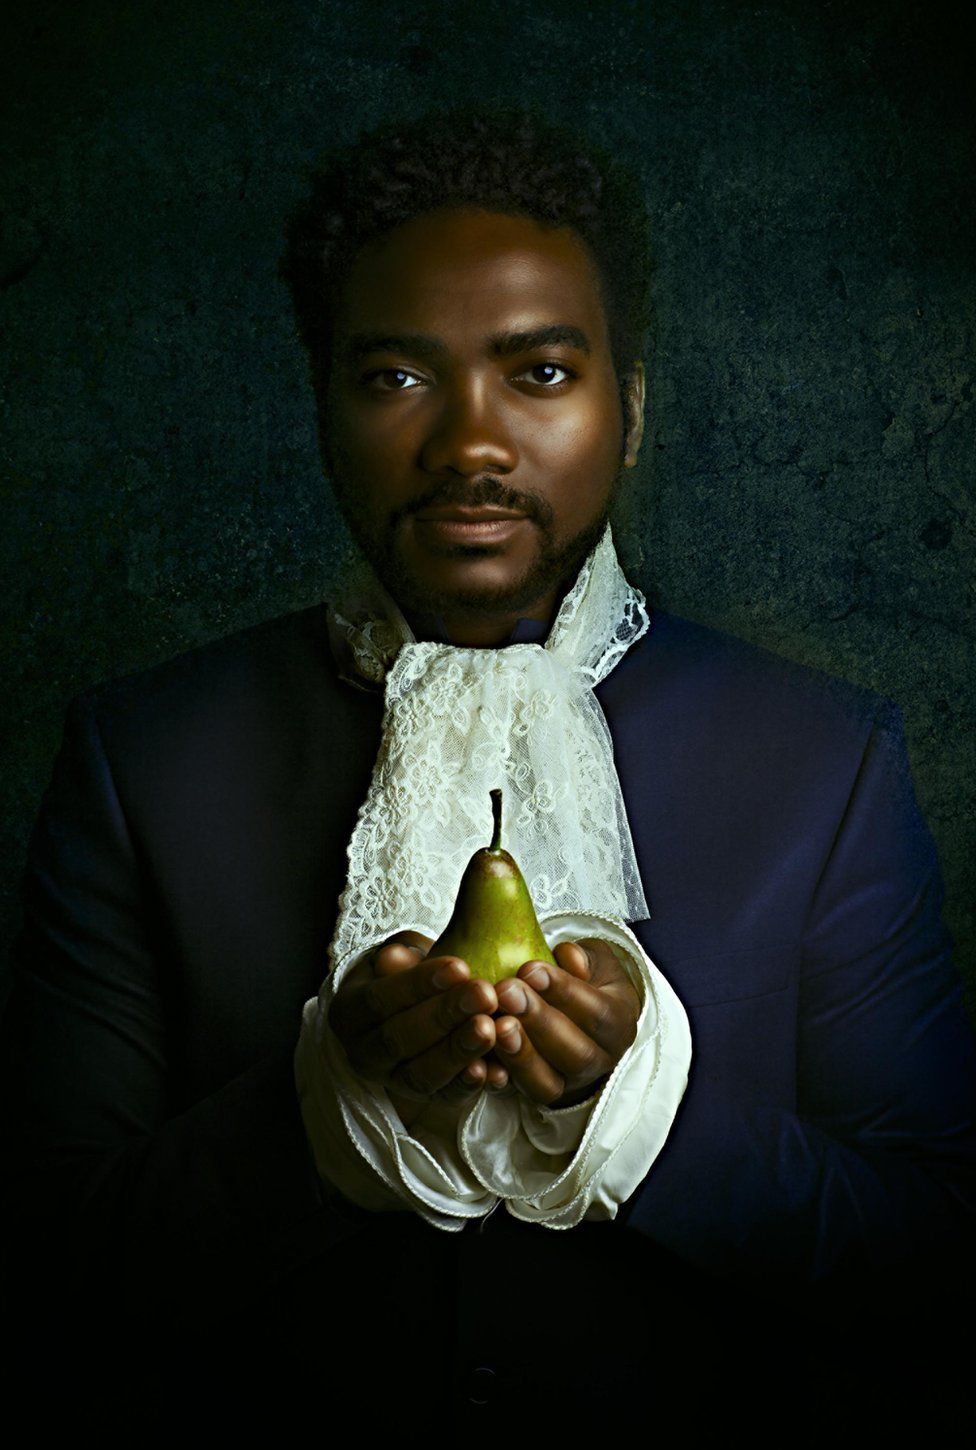 Portrait by Alanna Airitam showing a man holding a pear